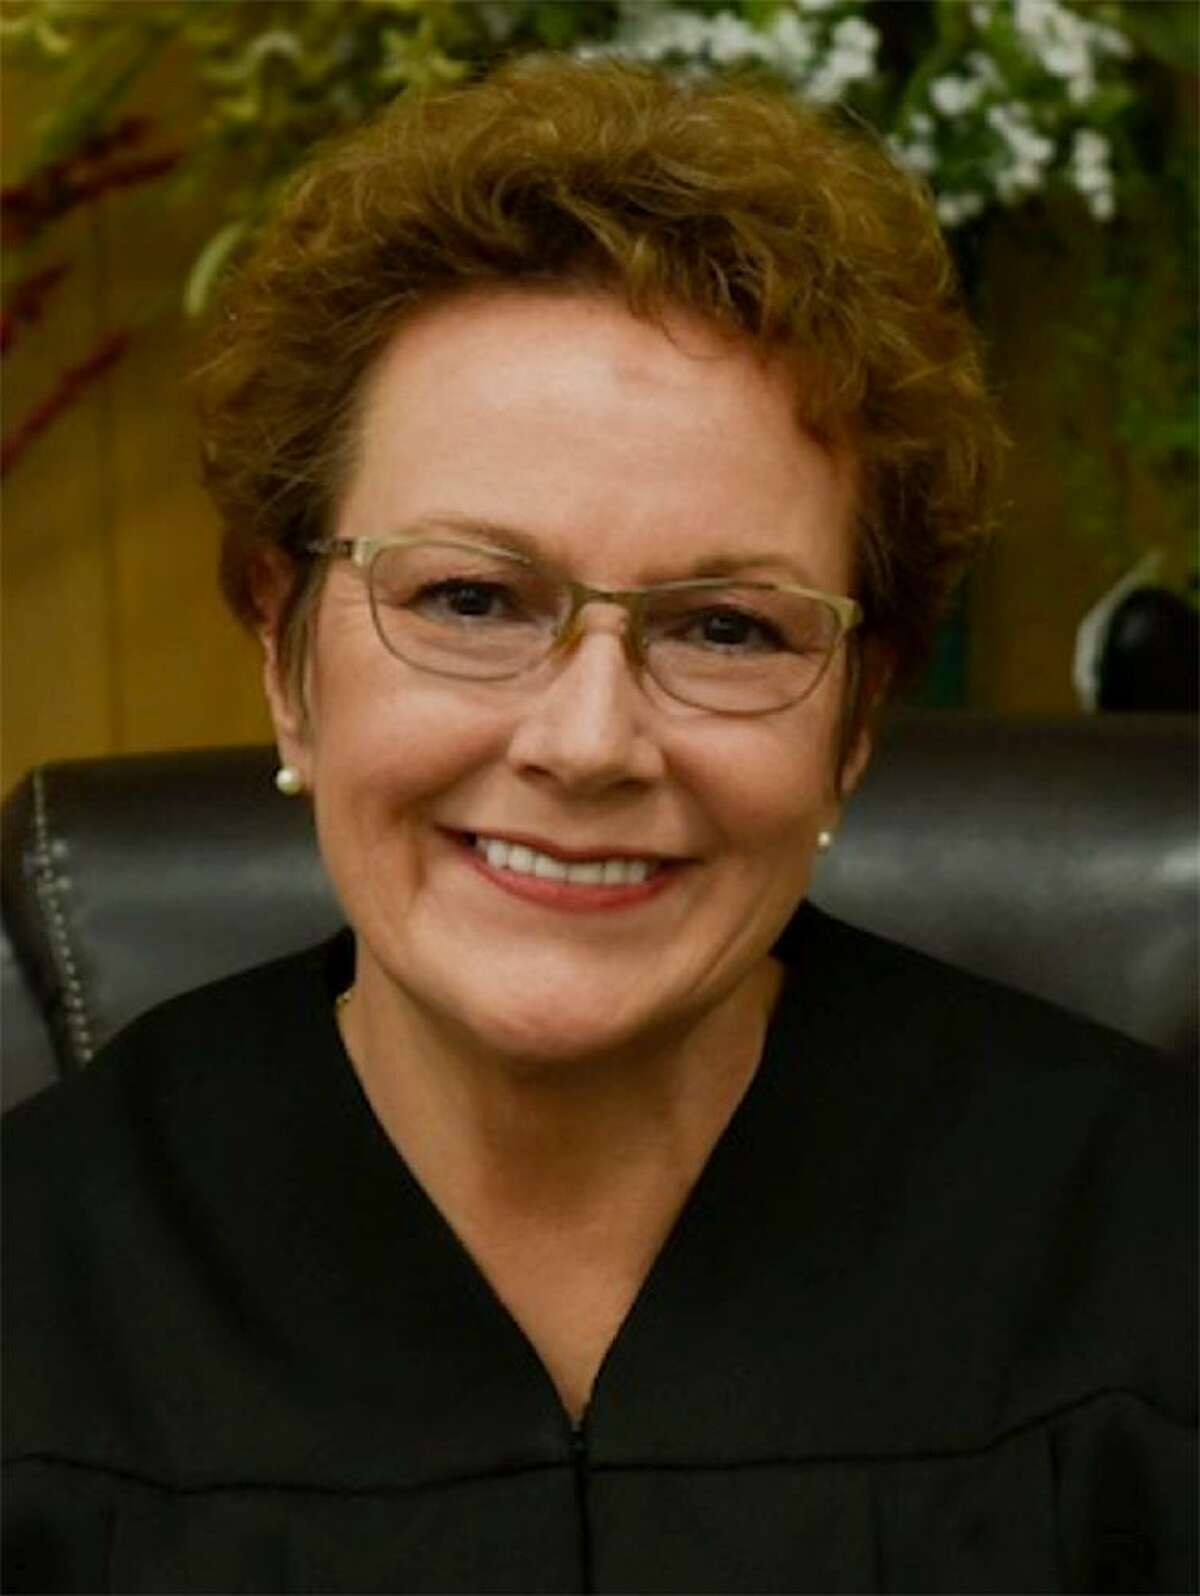 Former Bexar County Probate Judge Kelly Cross worked in Christopher “Chris” Pettit’s law firm for about 10 months until she said she quit in March after seeing something that that made her “uncomfortable.” She said she took her “suspicions immediately to where they needed to go.